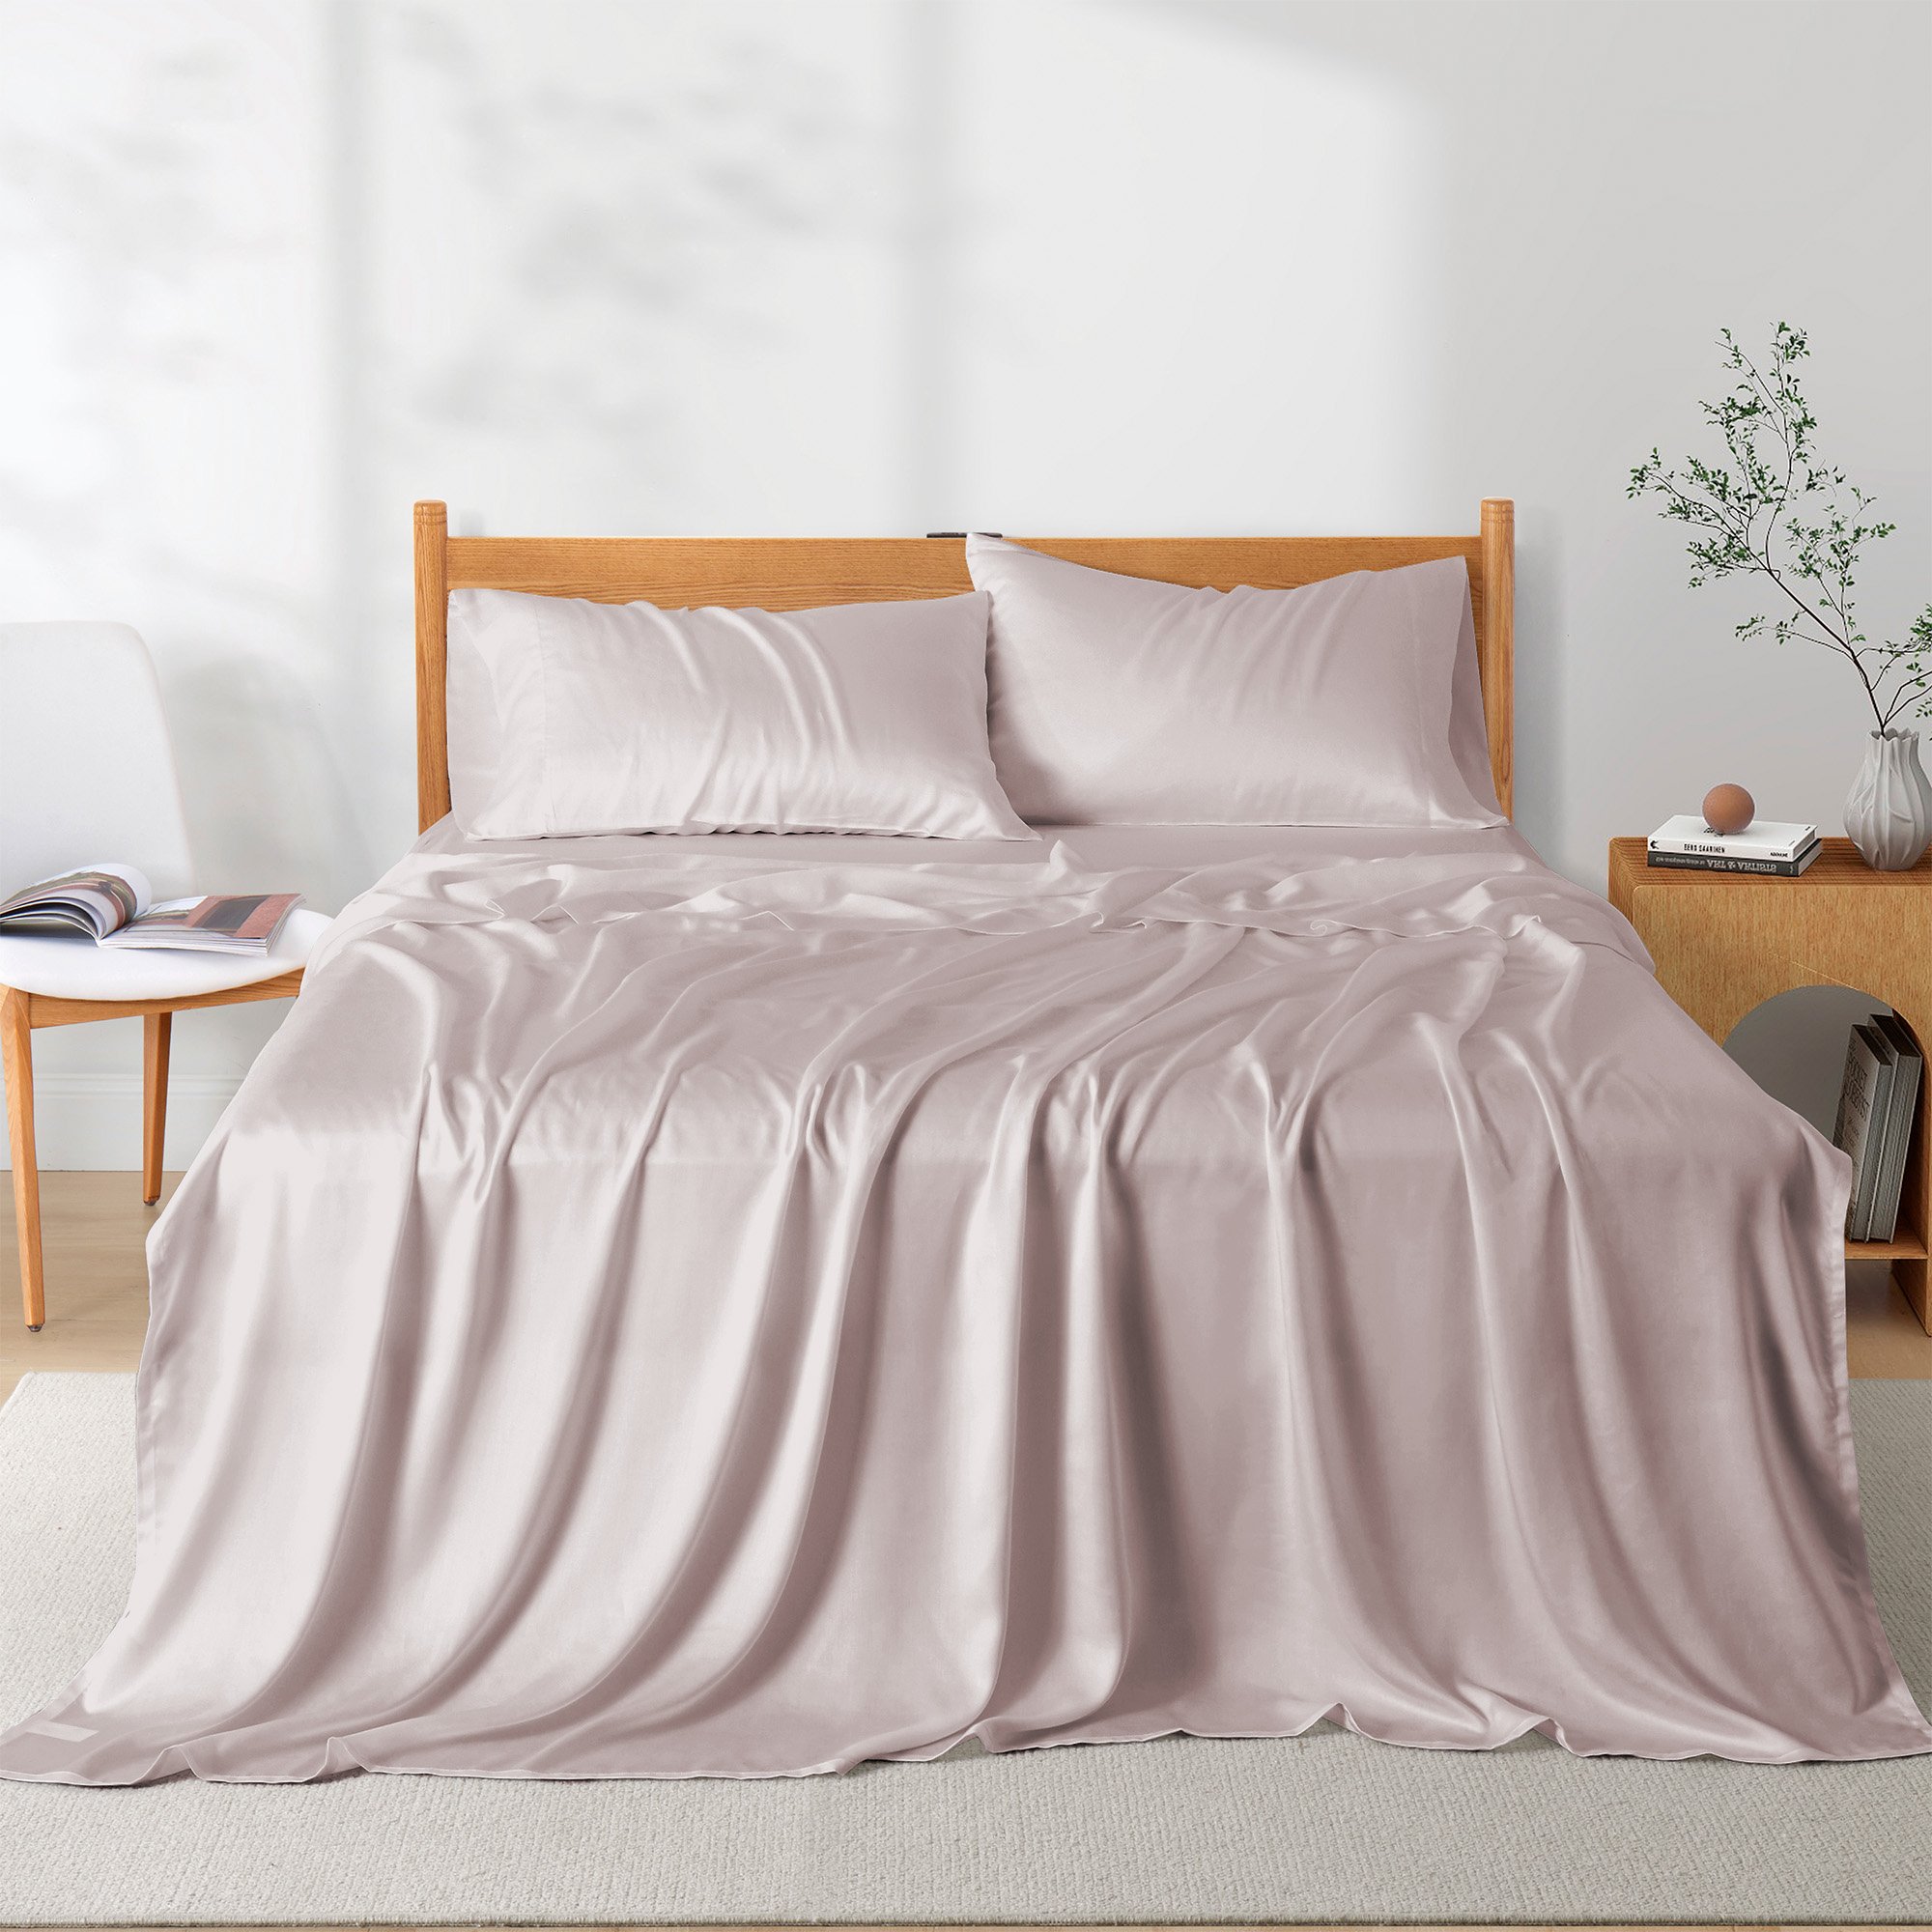 Tencel Lyocell Bed Sheets Silky Soft & Smooth Breathable Sheets, Luxury Hotel Bedding - Twin Size